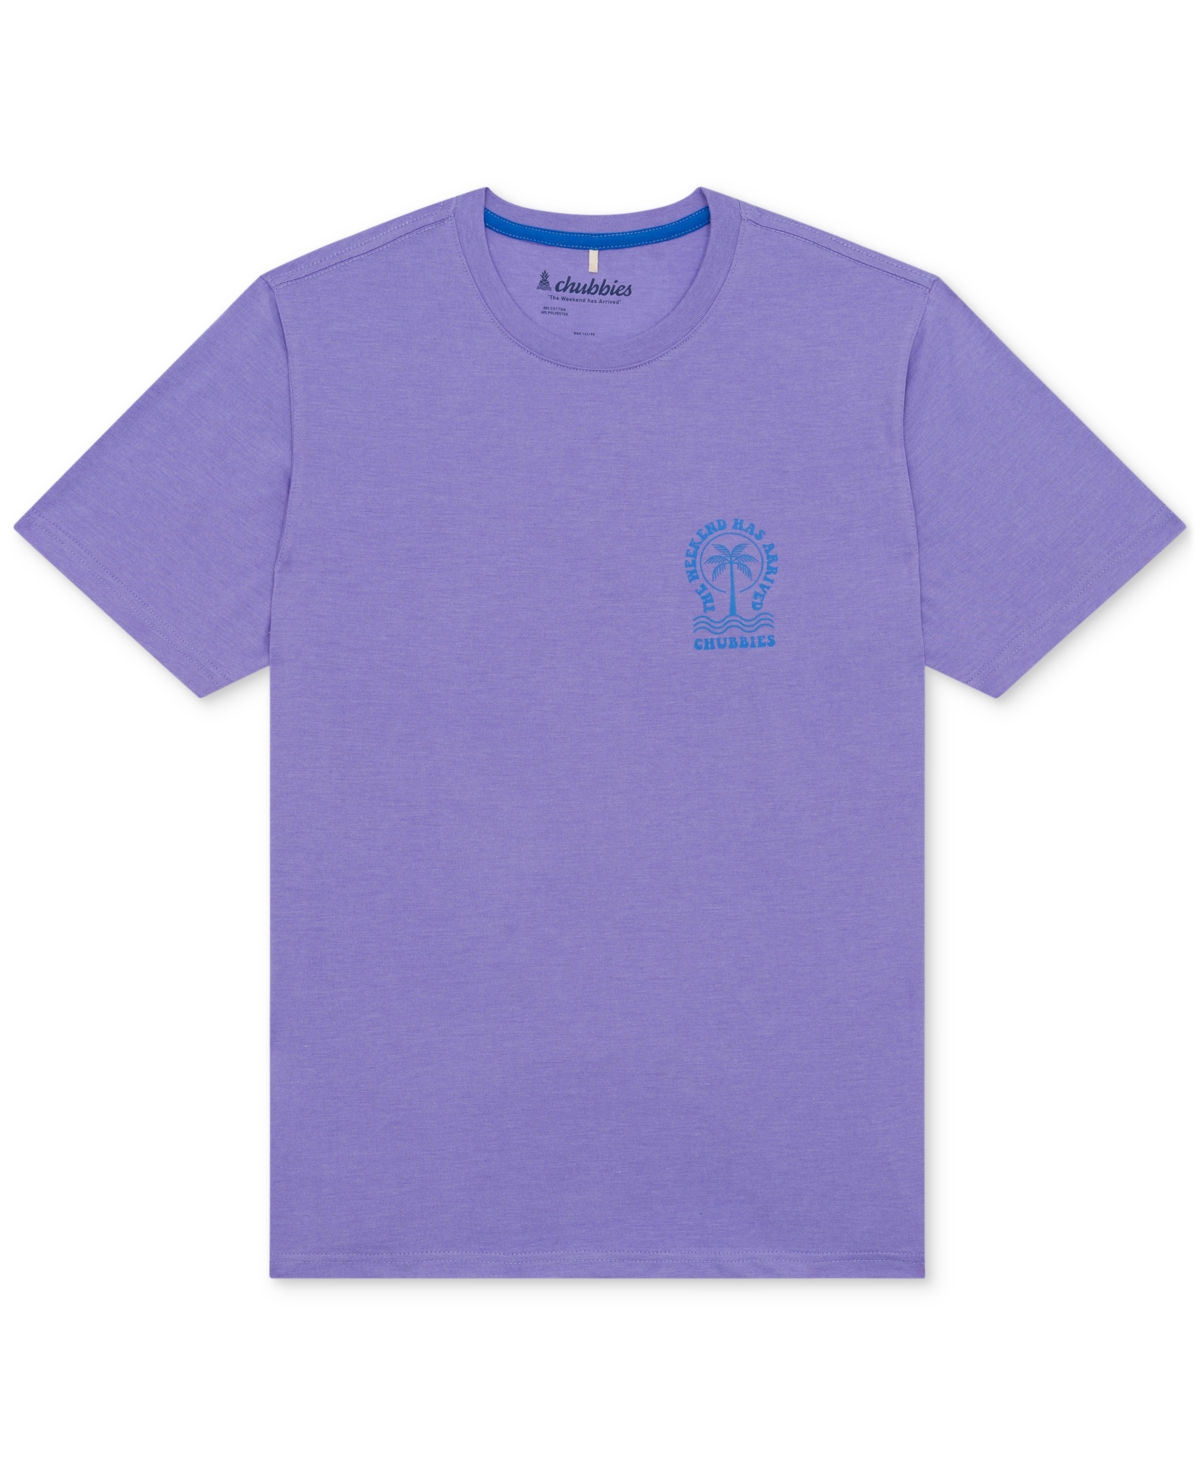 Men's The Keep Calm Relaxed-Fit Logo Graphic T-Shirt - Light/Pastel Purple